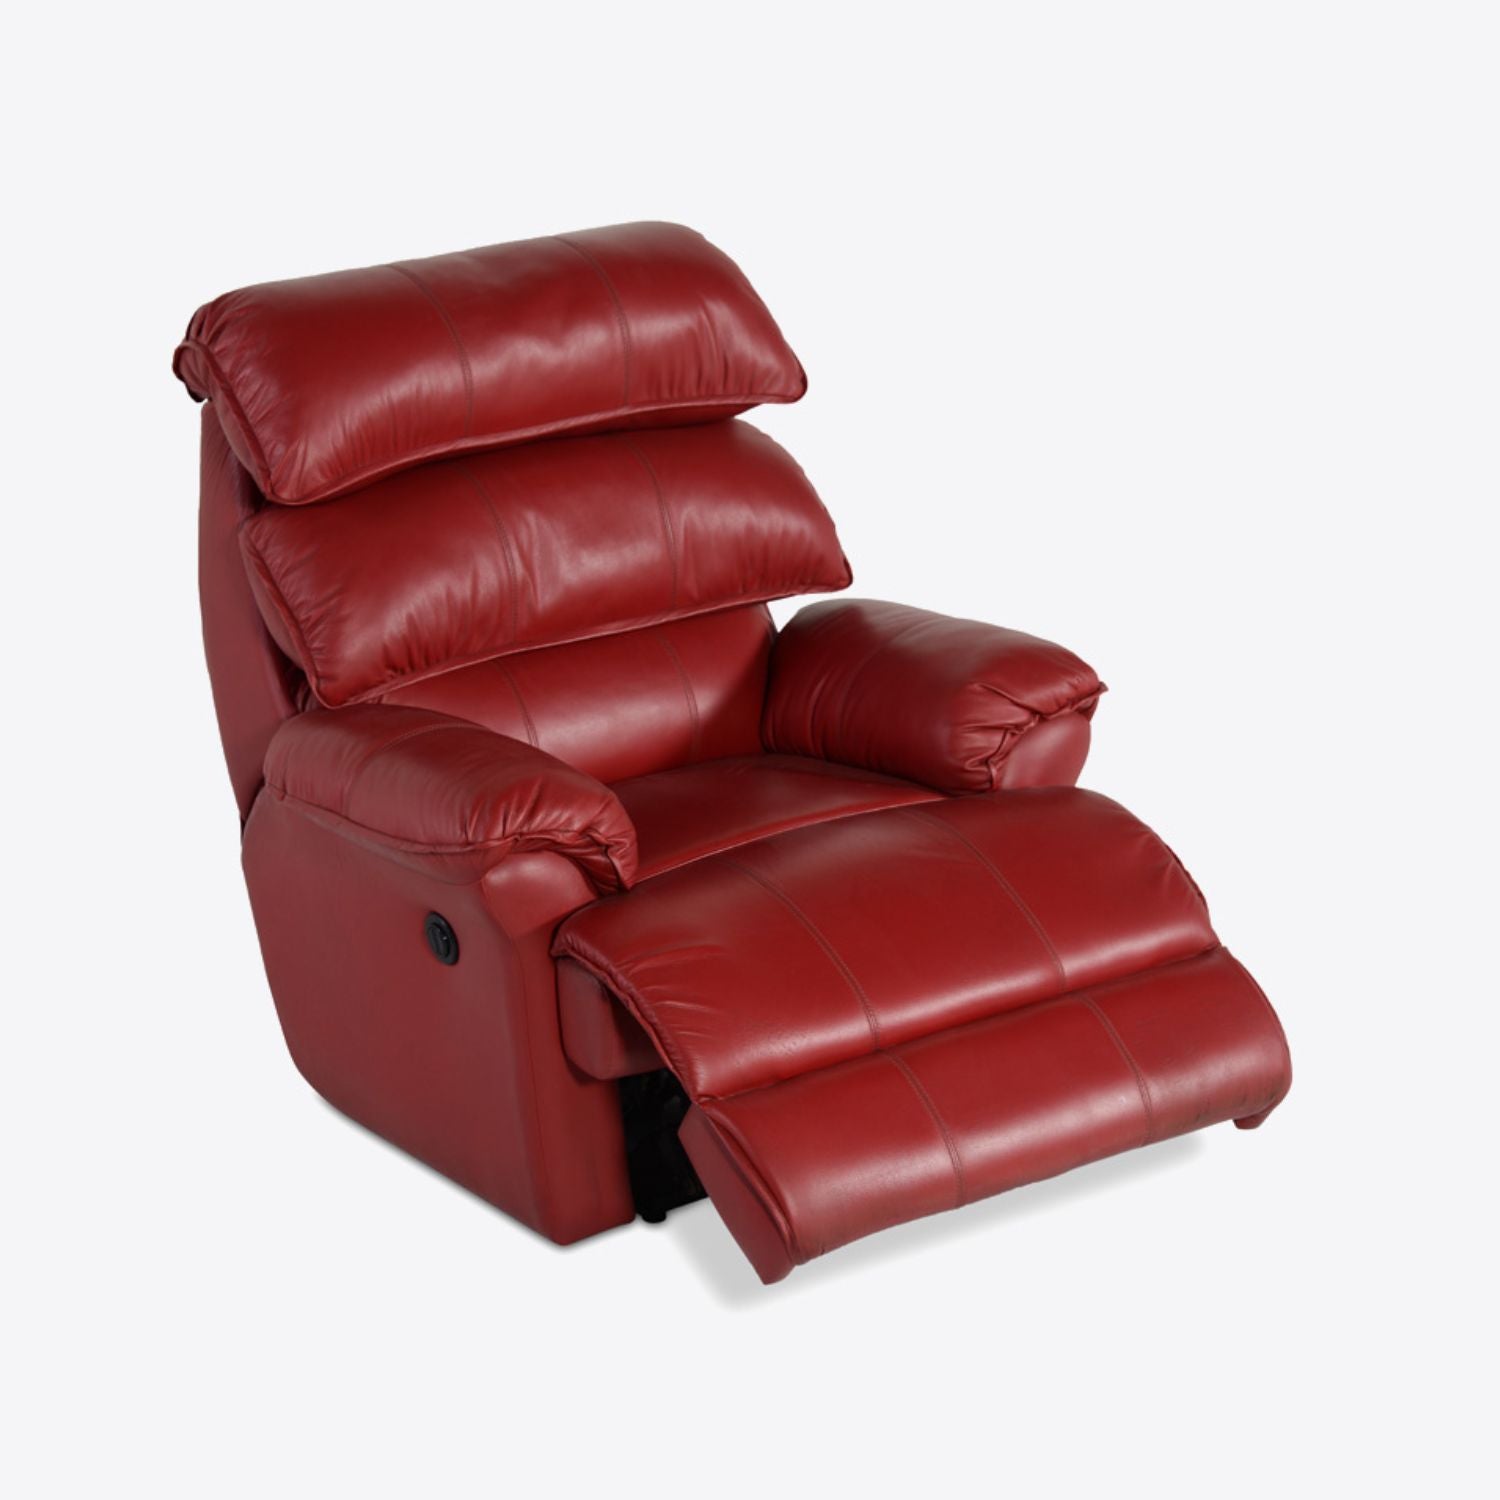 208 RECLINER CHAIR Recliners India